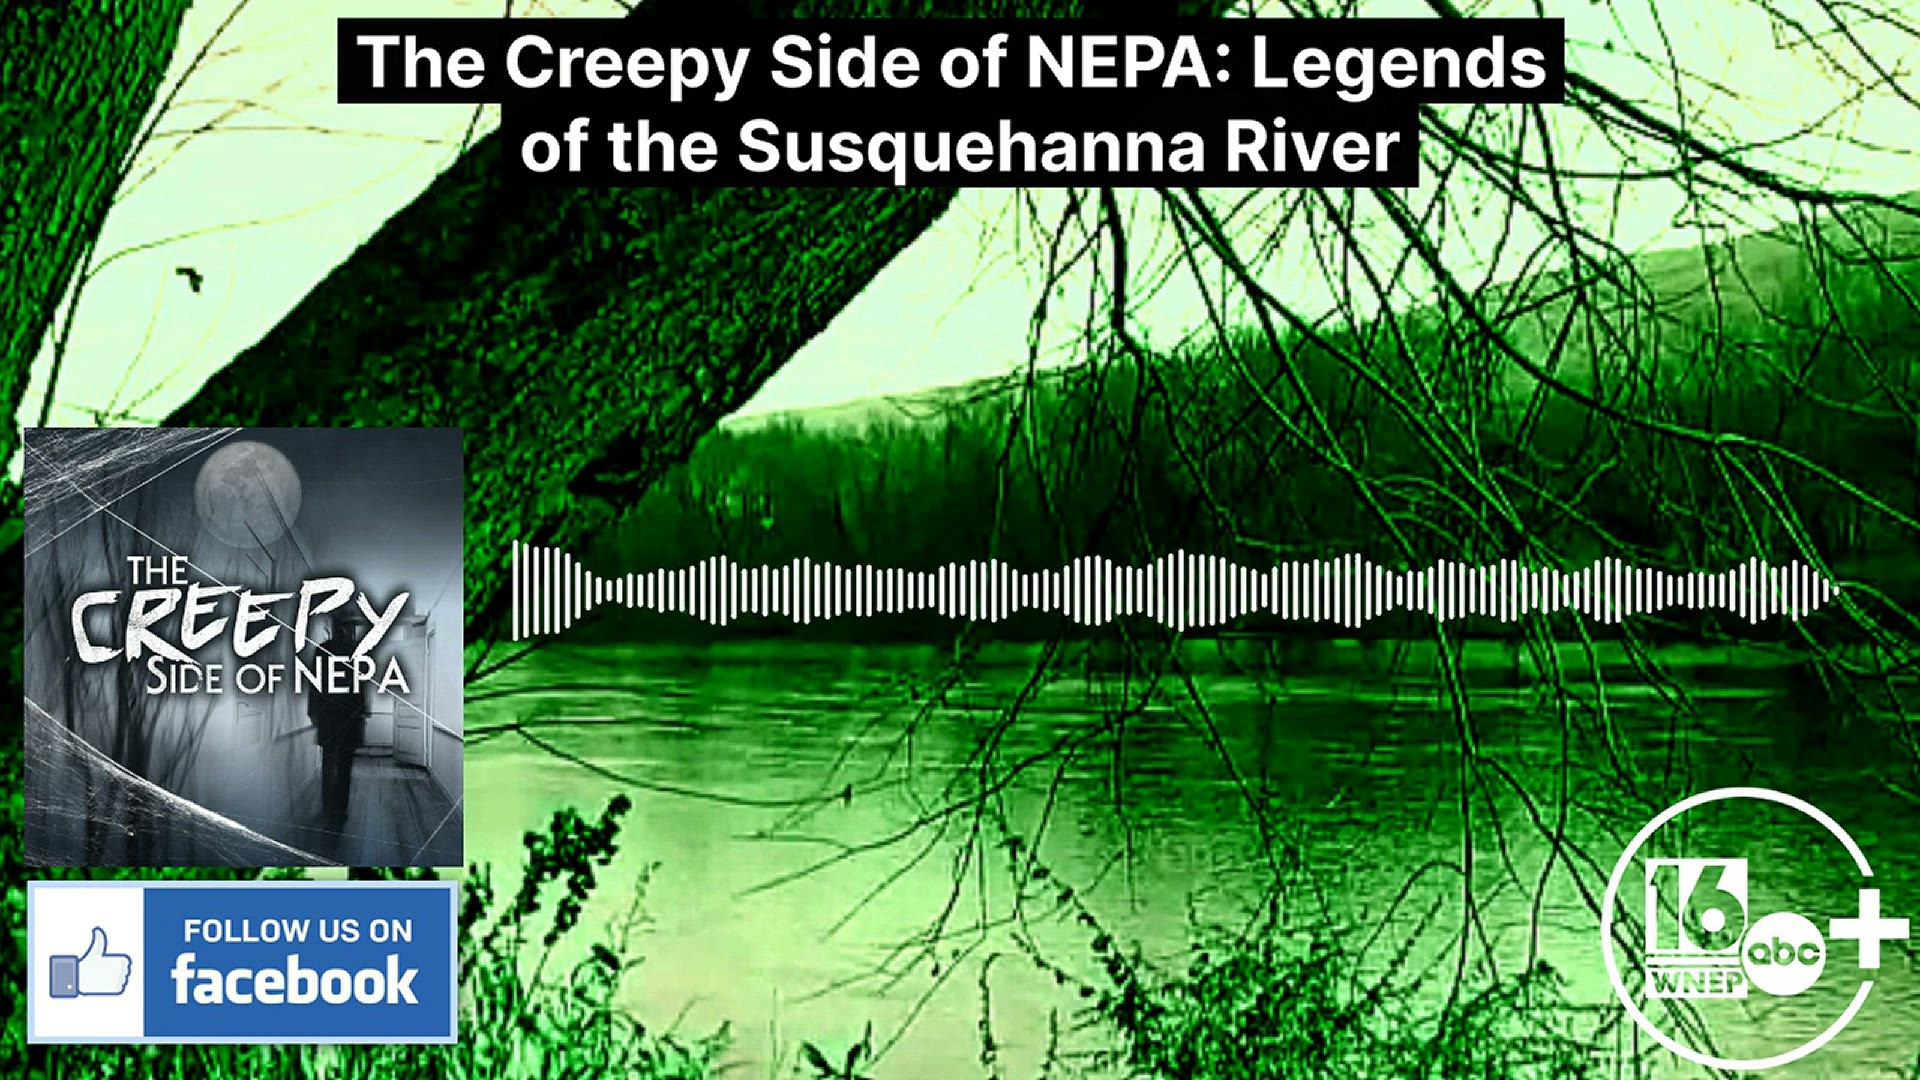 In this episode, we talk with author Shannon Jones. She shares some of her favorite legends and stories surrounding the river.